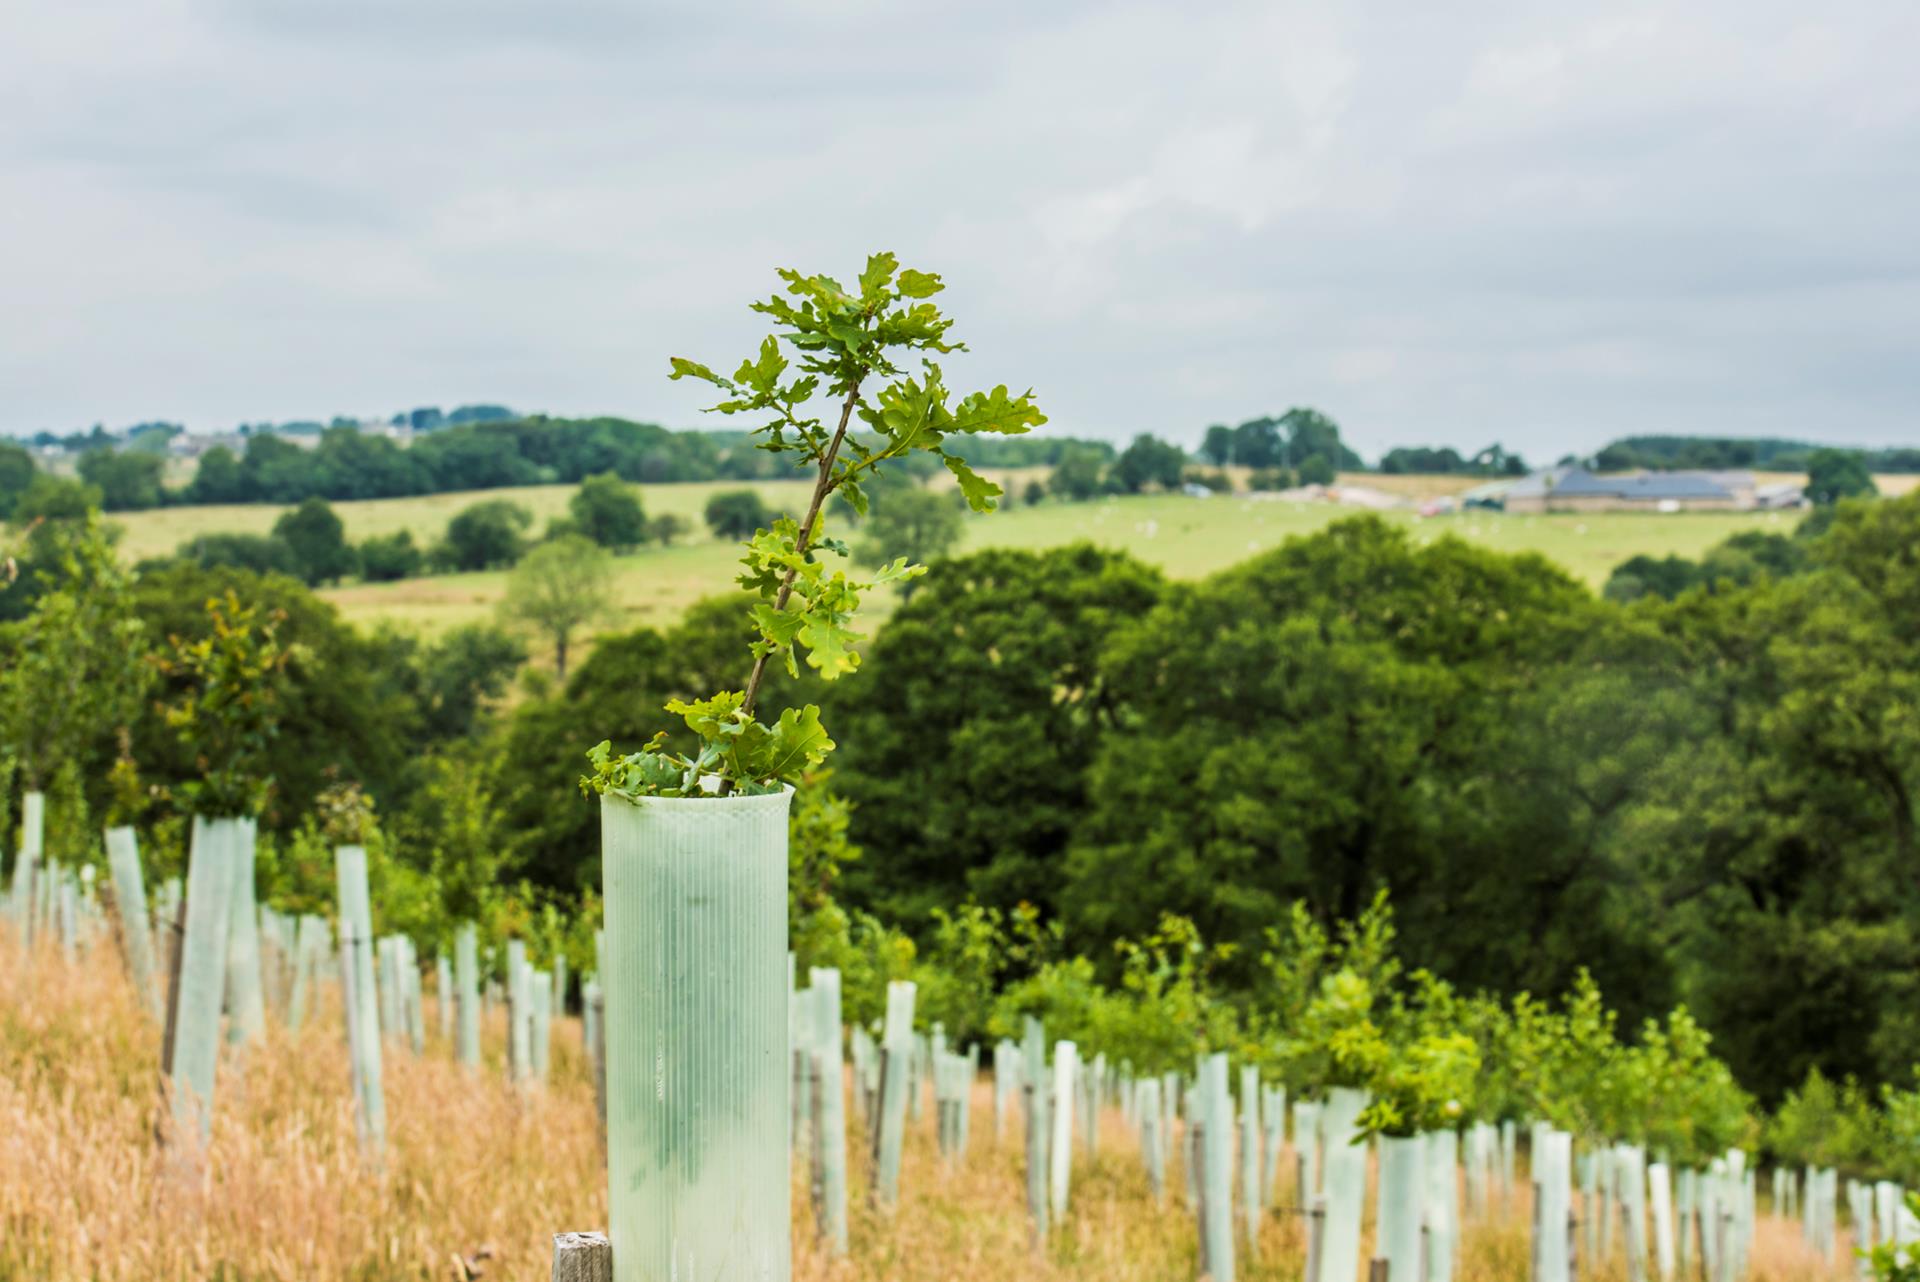 Woodland Carbon Guarantee (WCaG) – Delivering Long Term Income Security from Woodland Creation